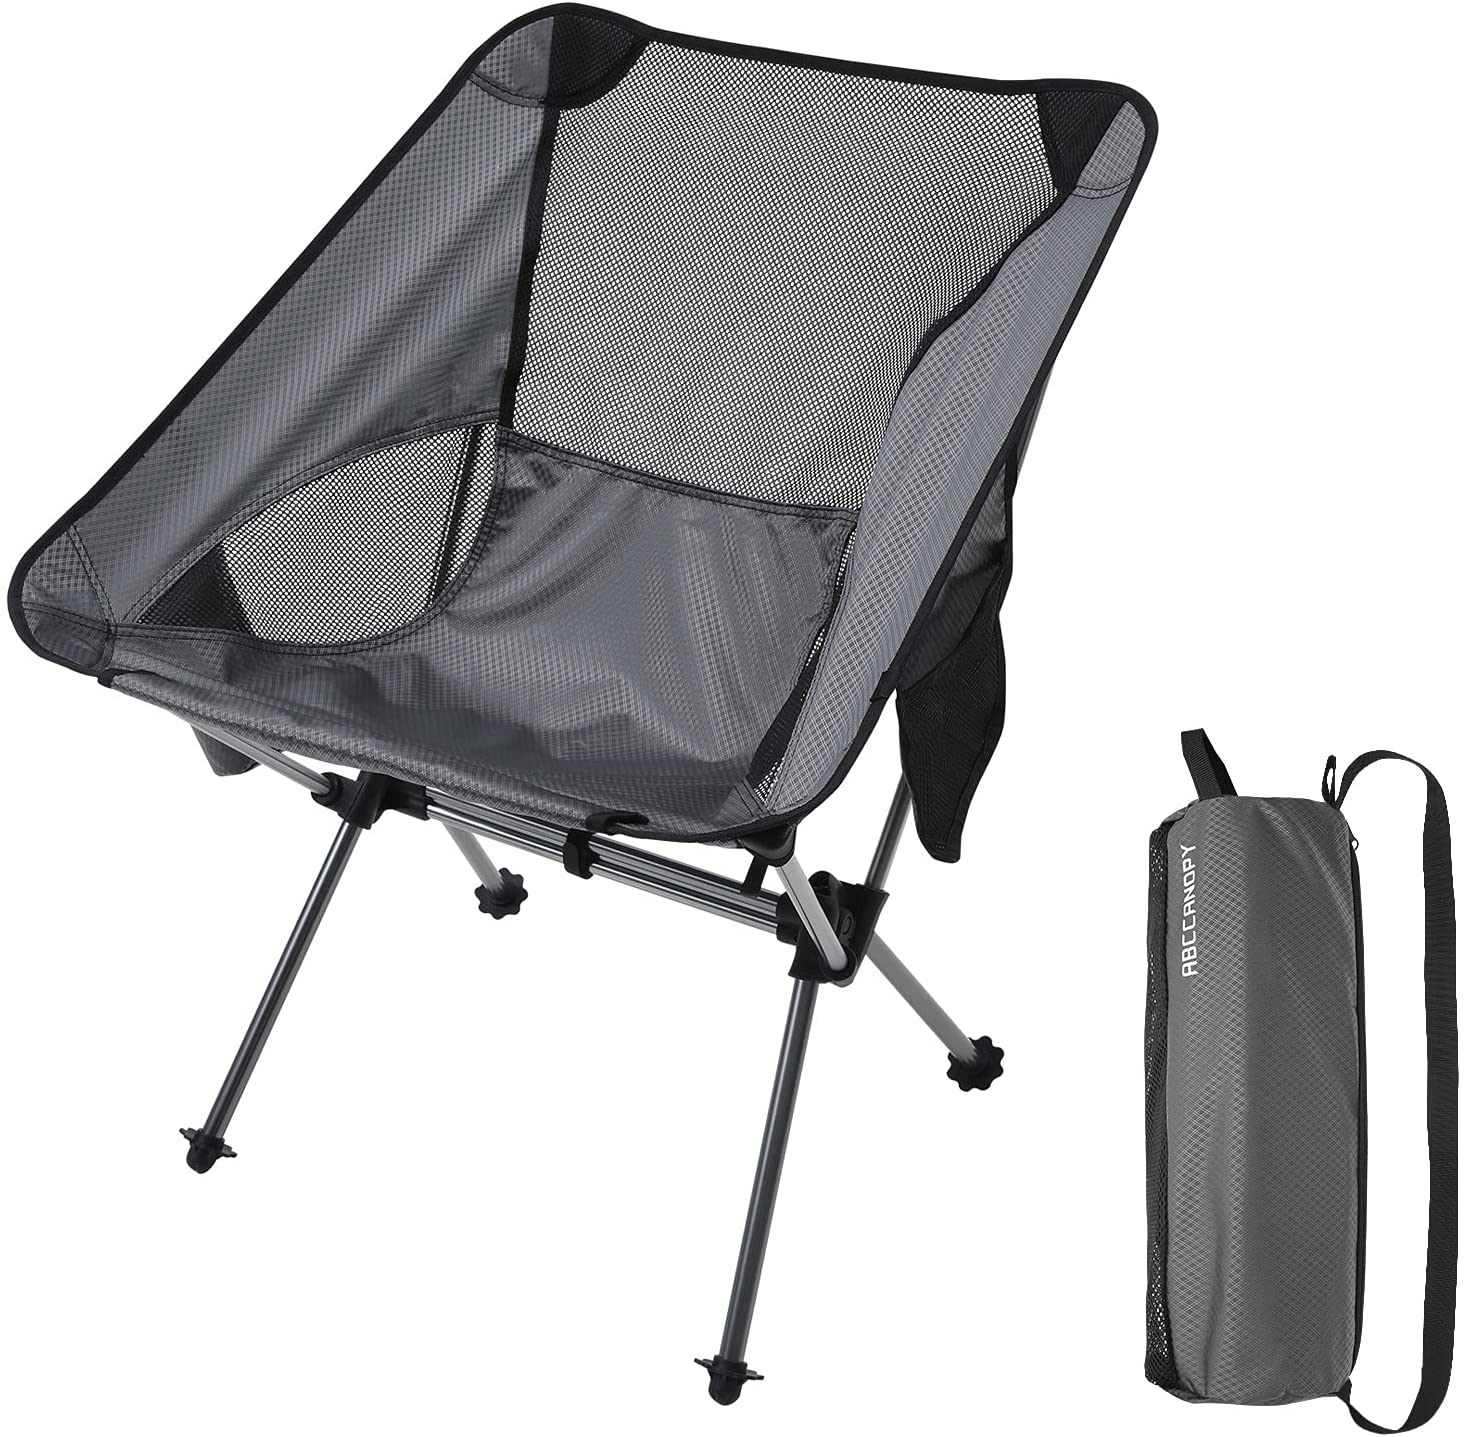 Ultralight Portable Camping Chairs-Large - ABC-CANOPY